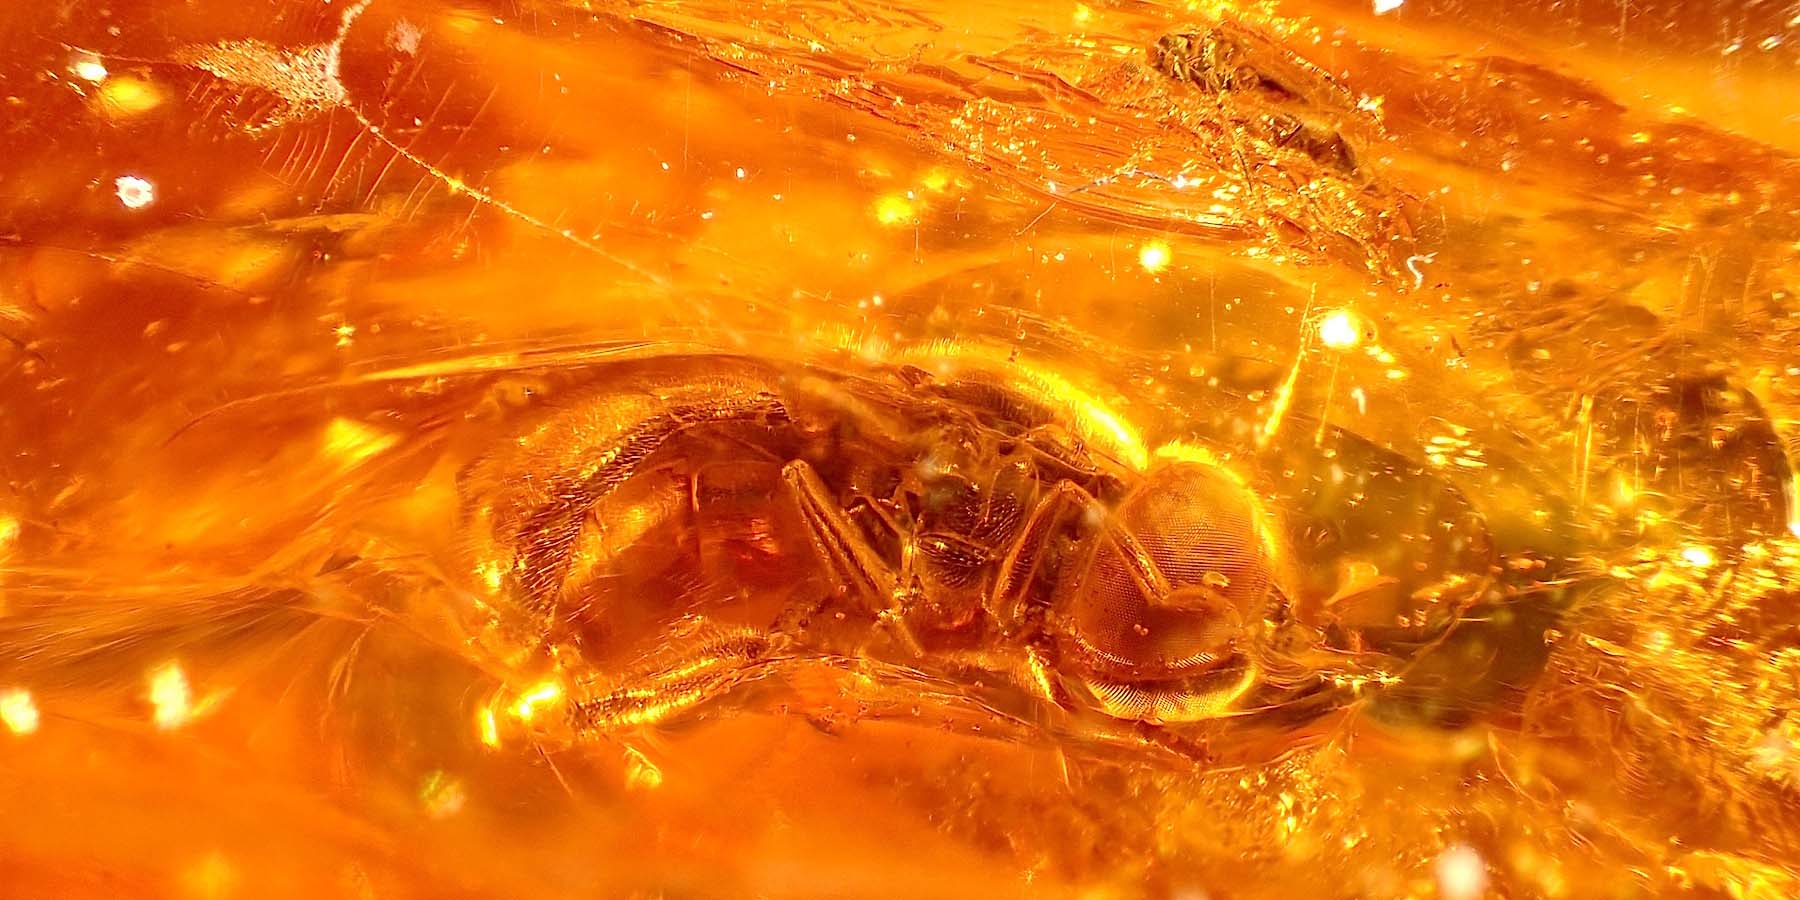 Zoomed in photo of a fly-like insect trapped in orange amber